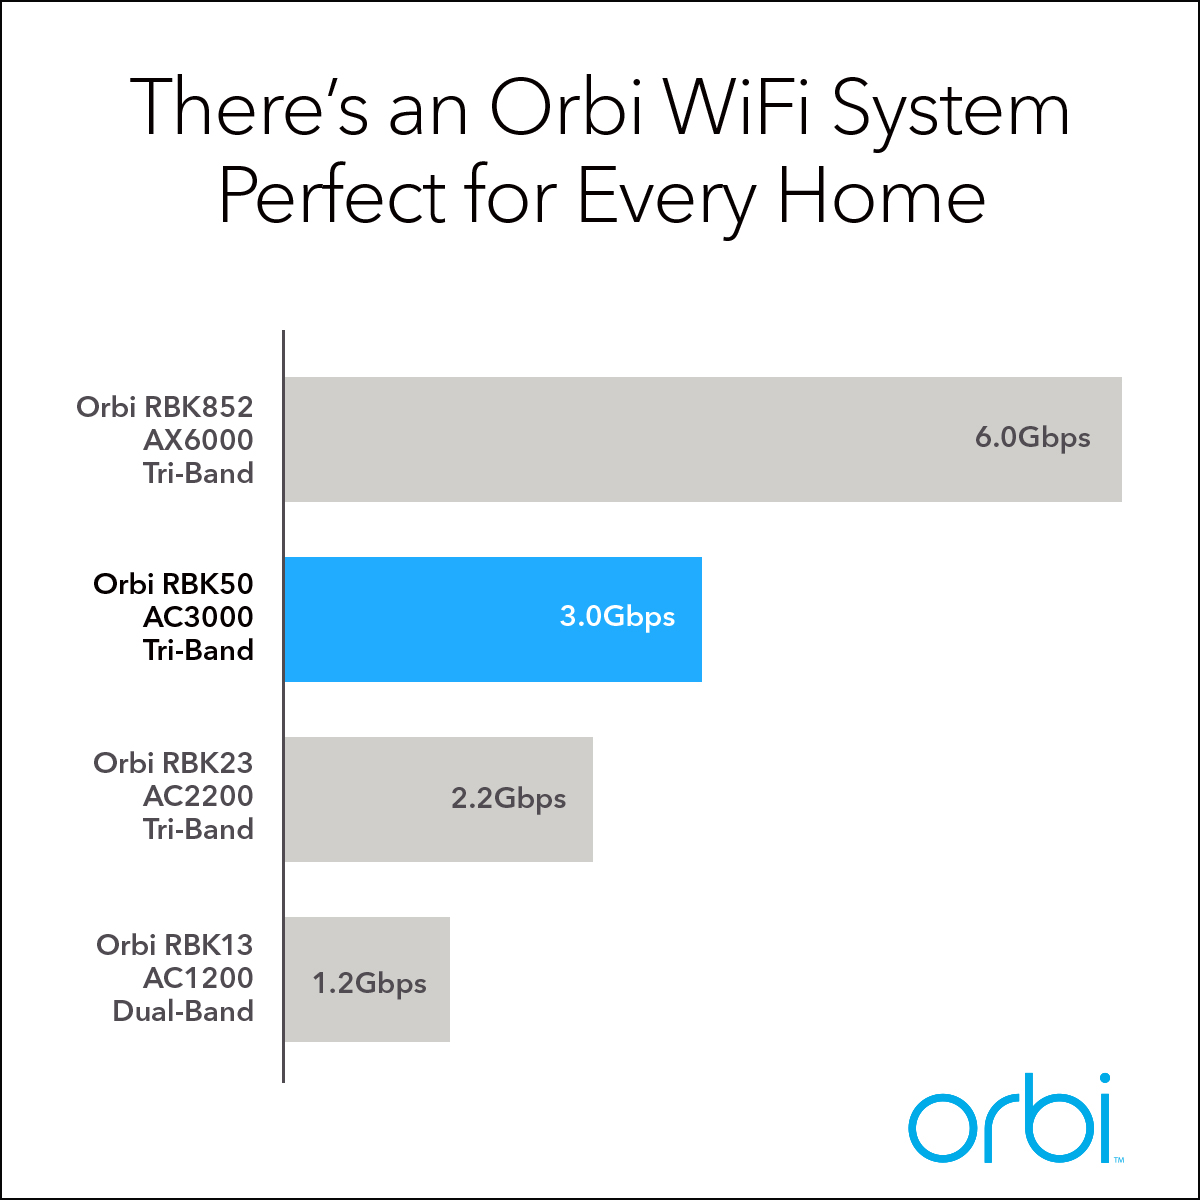 NETGEAR - Orbi AC3000 Tri-Band Mesh WiFi System with Router + 1 Satellite Extender, 3Gbps (RBK50) - image 5 of 11